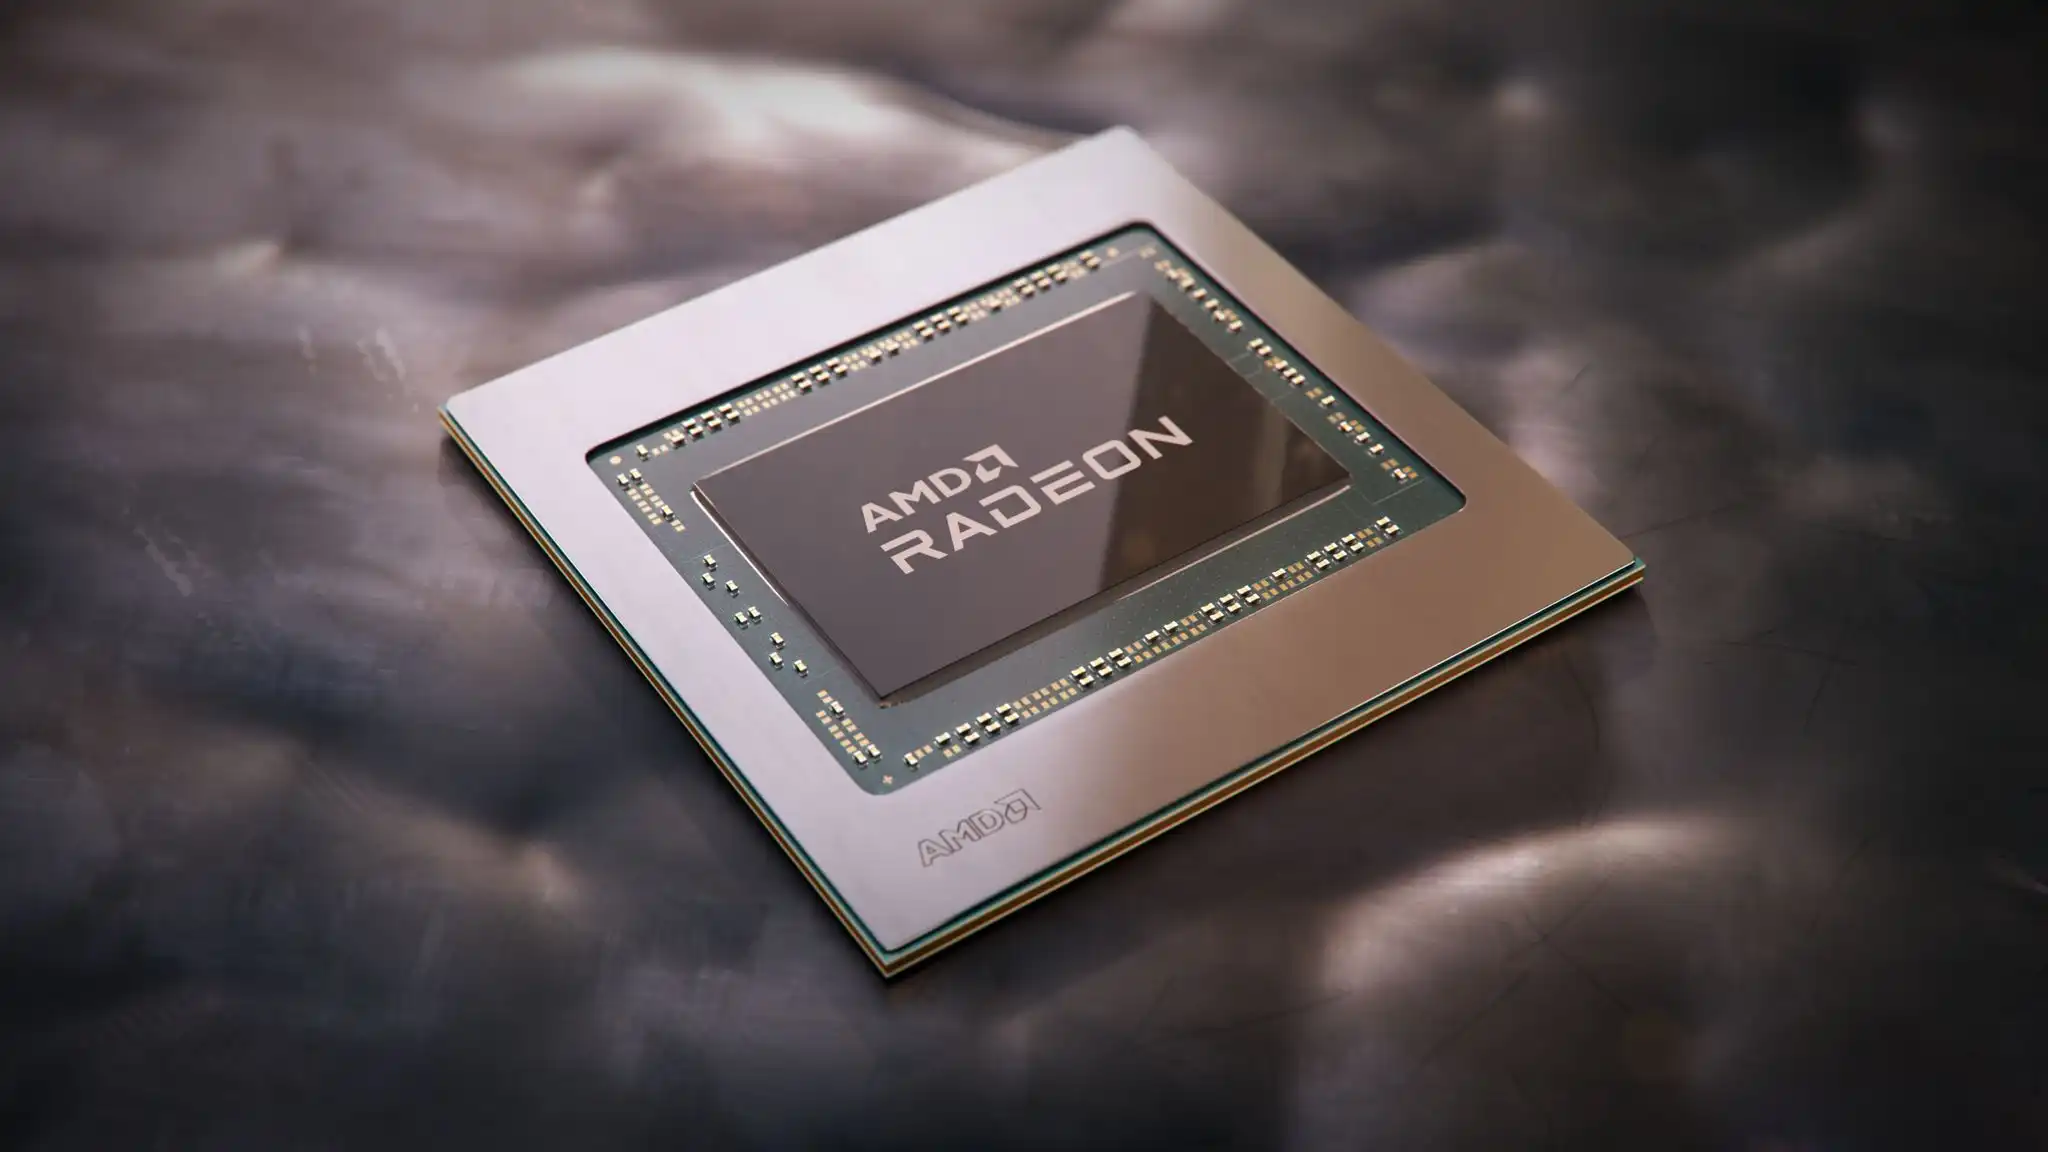 Amd Challenges Nvidia with New Ai Chip Abbo News